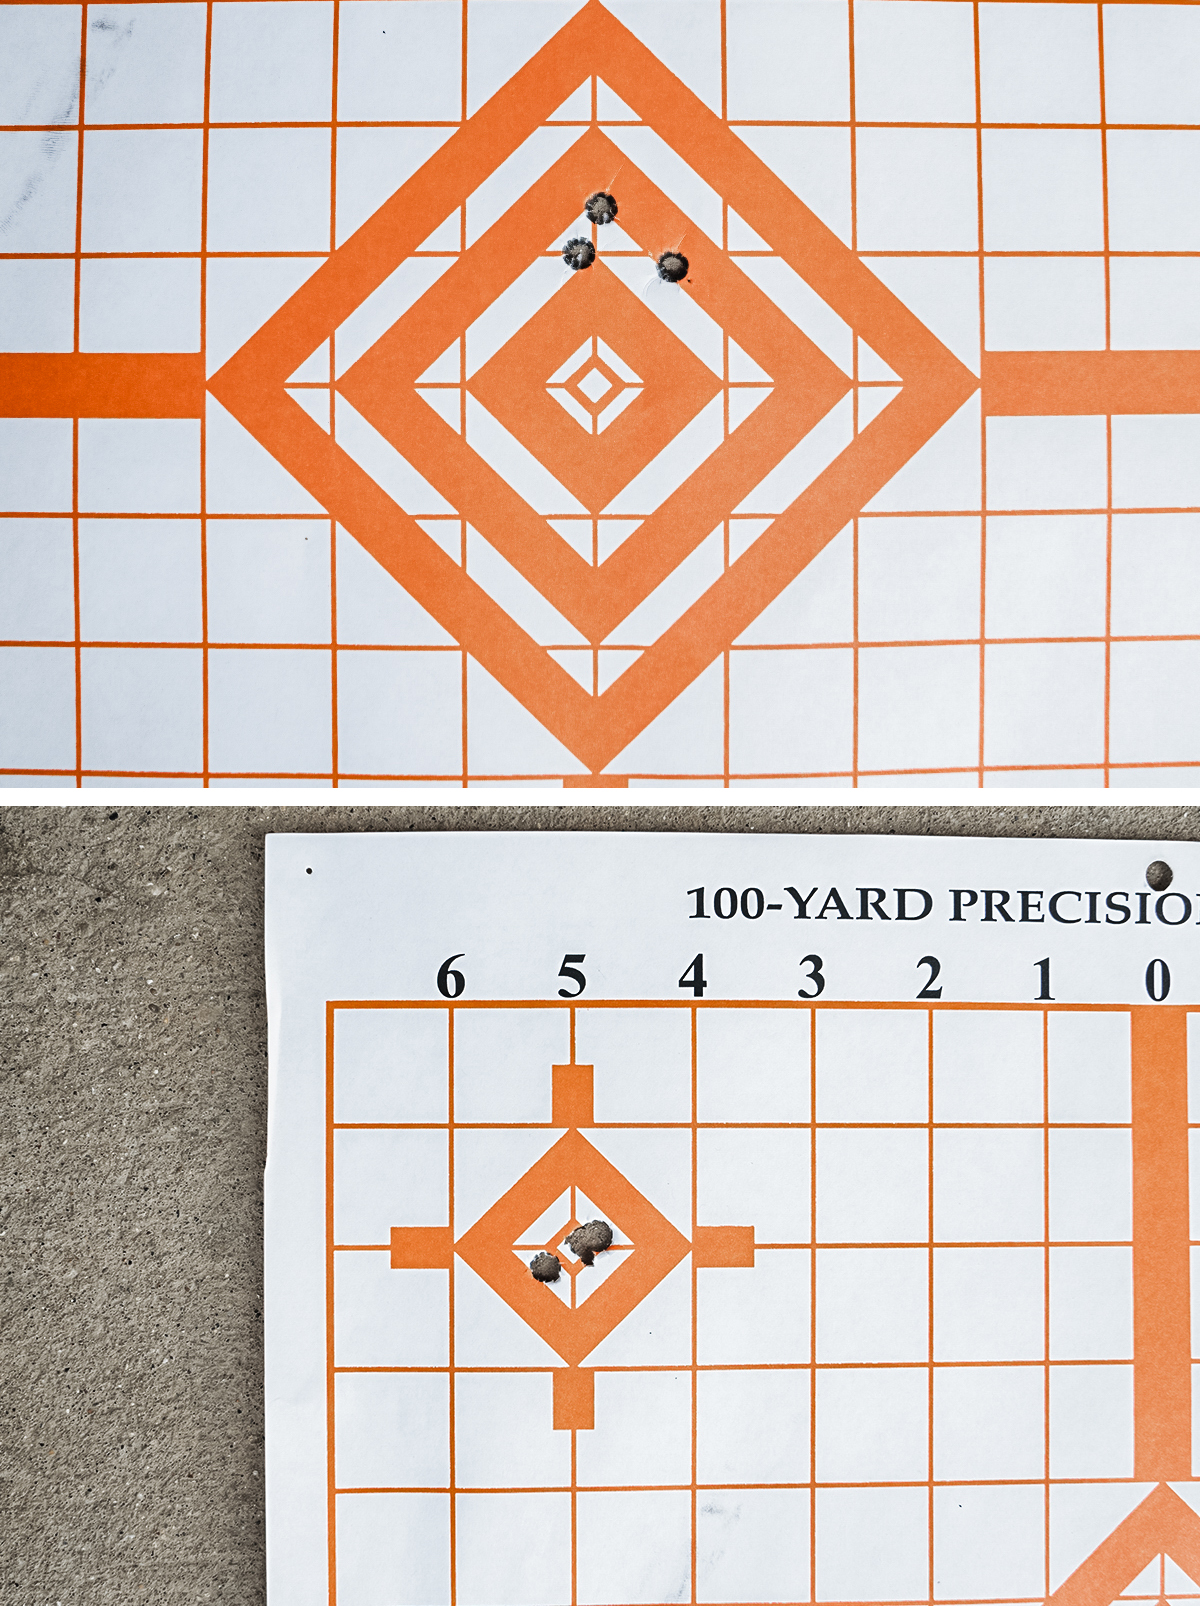 zeroing targets